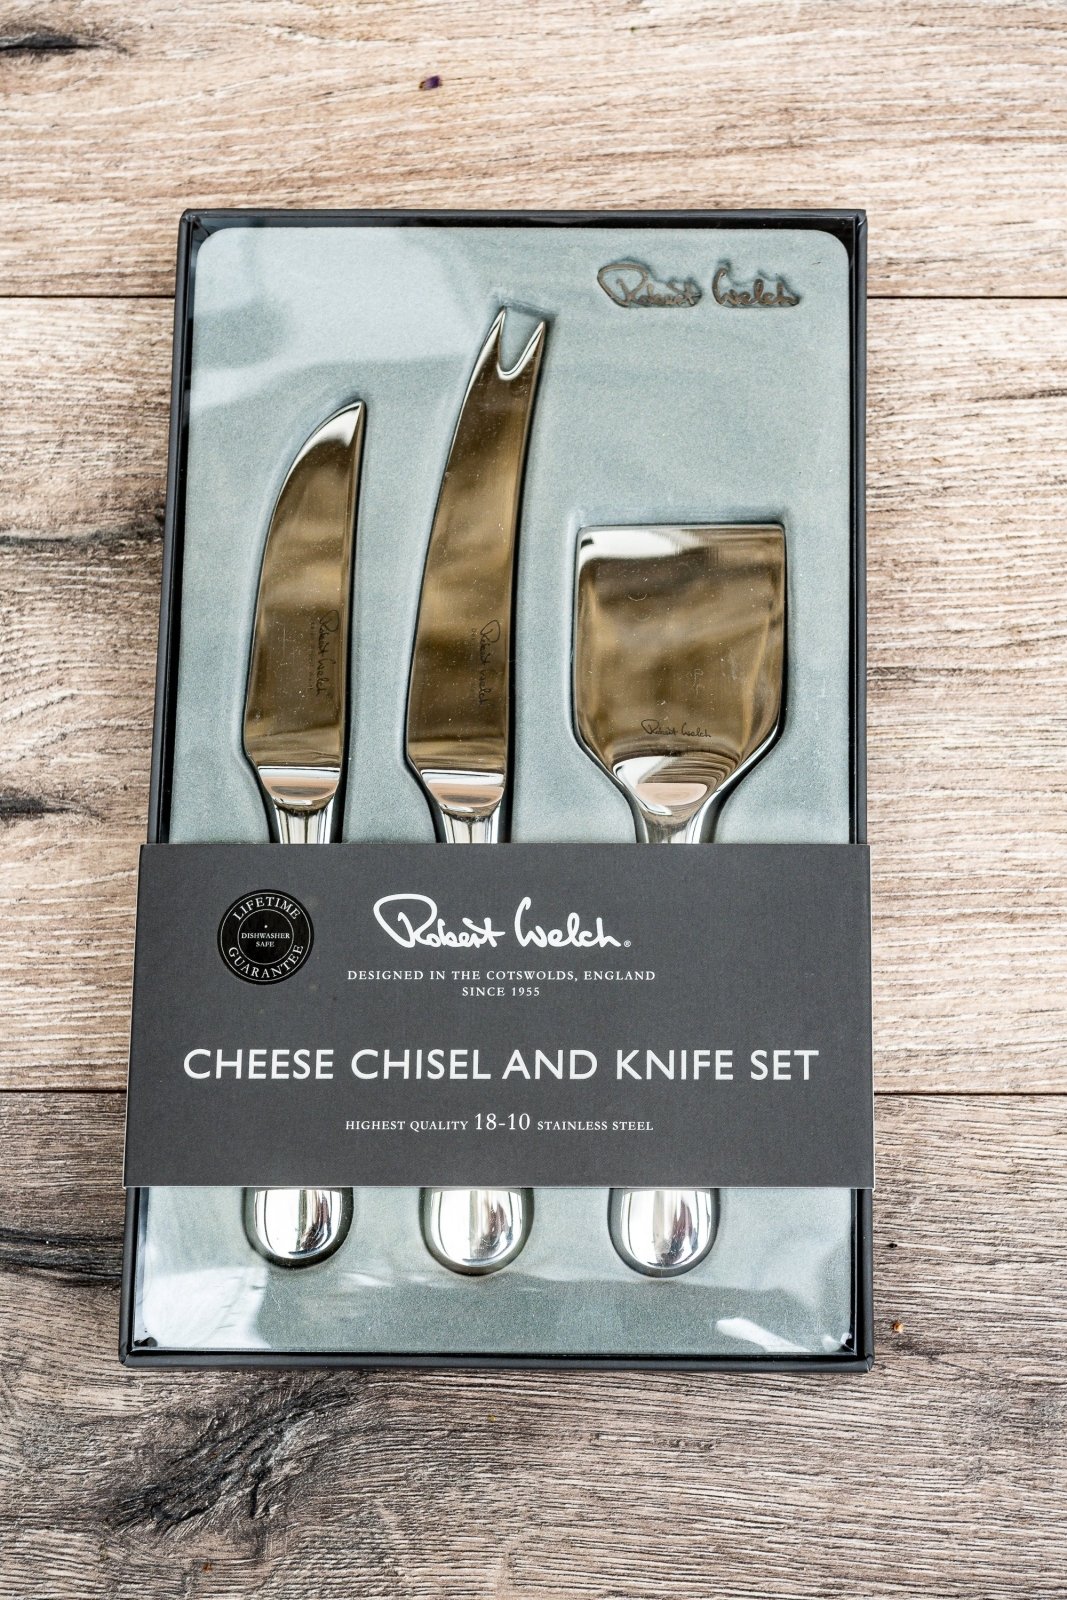 Robert Welch Cheese Chisel and Knife Set 3pc - RADBR1081V/3 - The Cotswold Knife Company